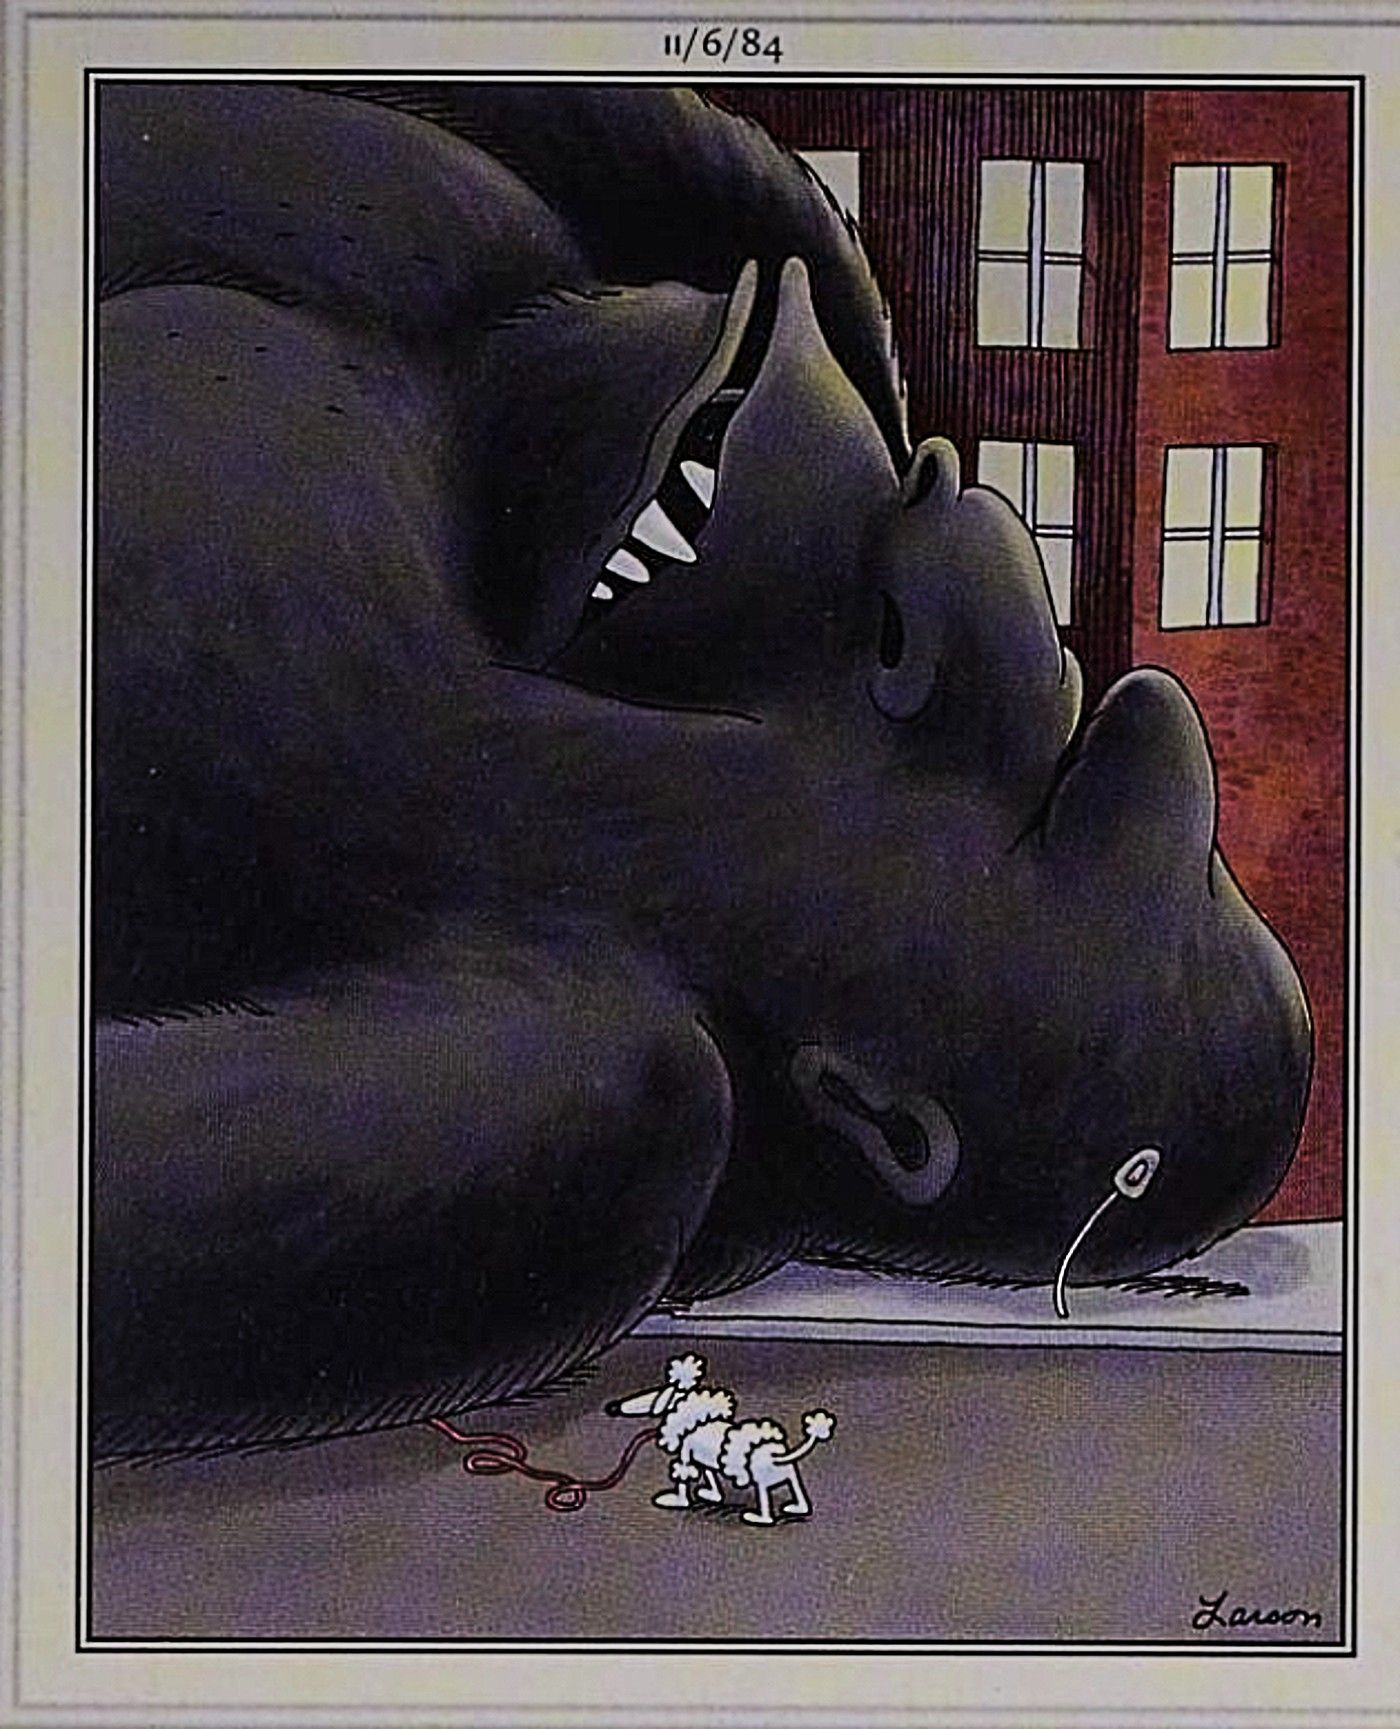 Far Side, dog owner squashed by fallen king kong